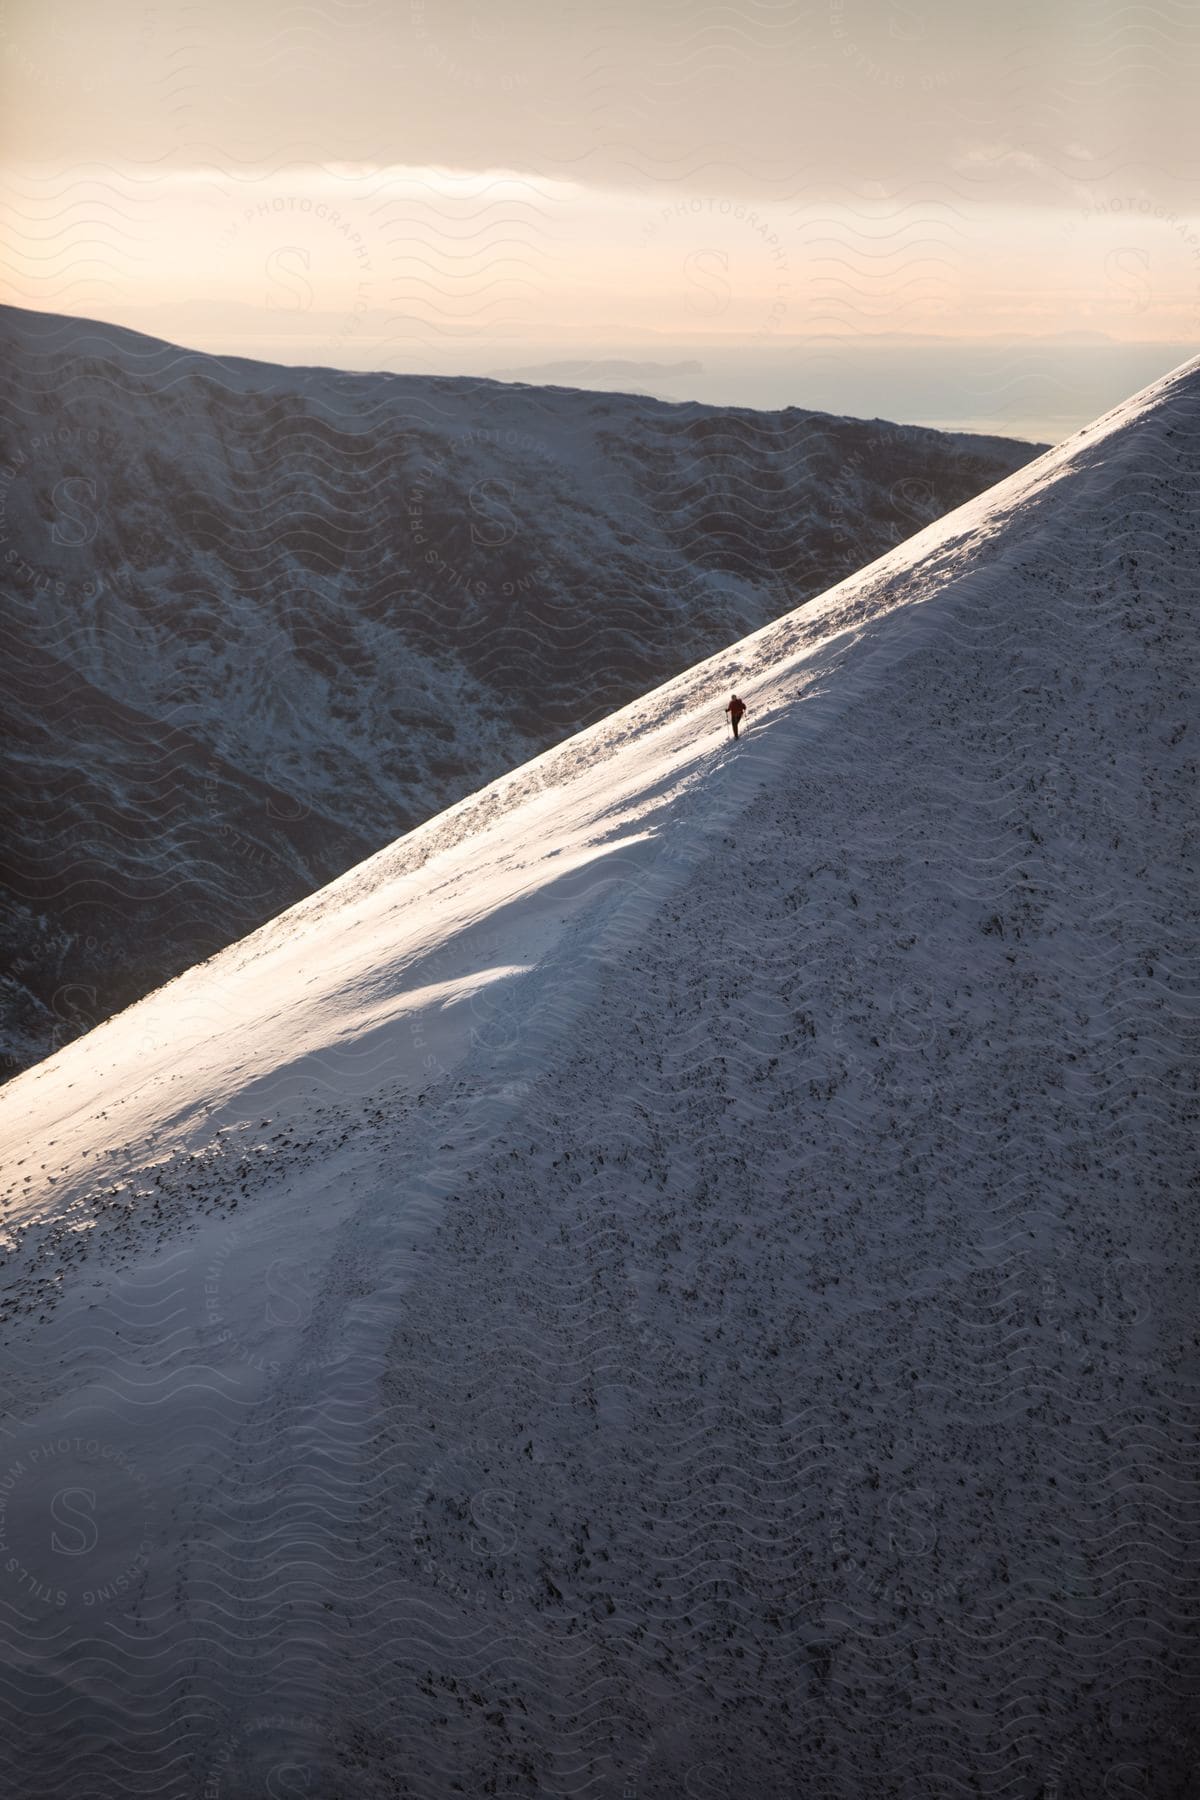 Mountaineer standing on snowcovered slope of mountain looking at sunset